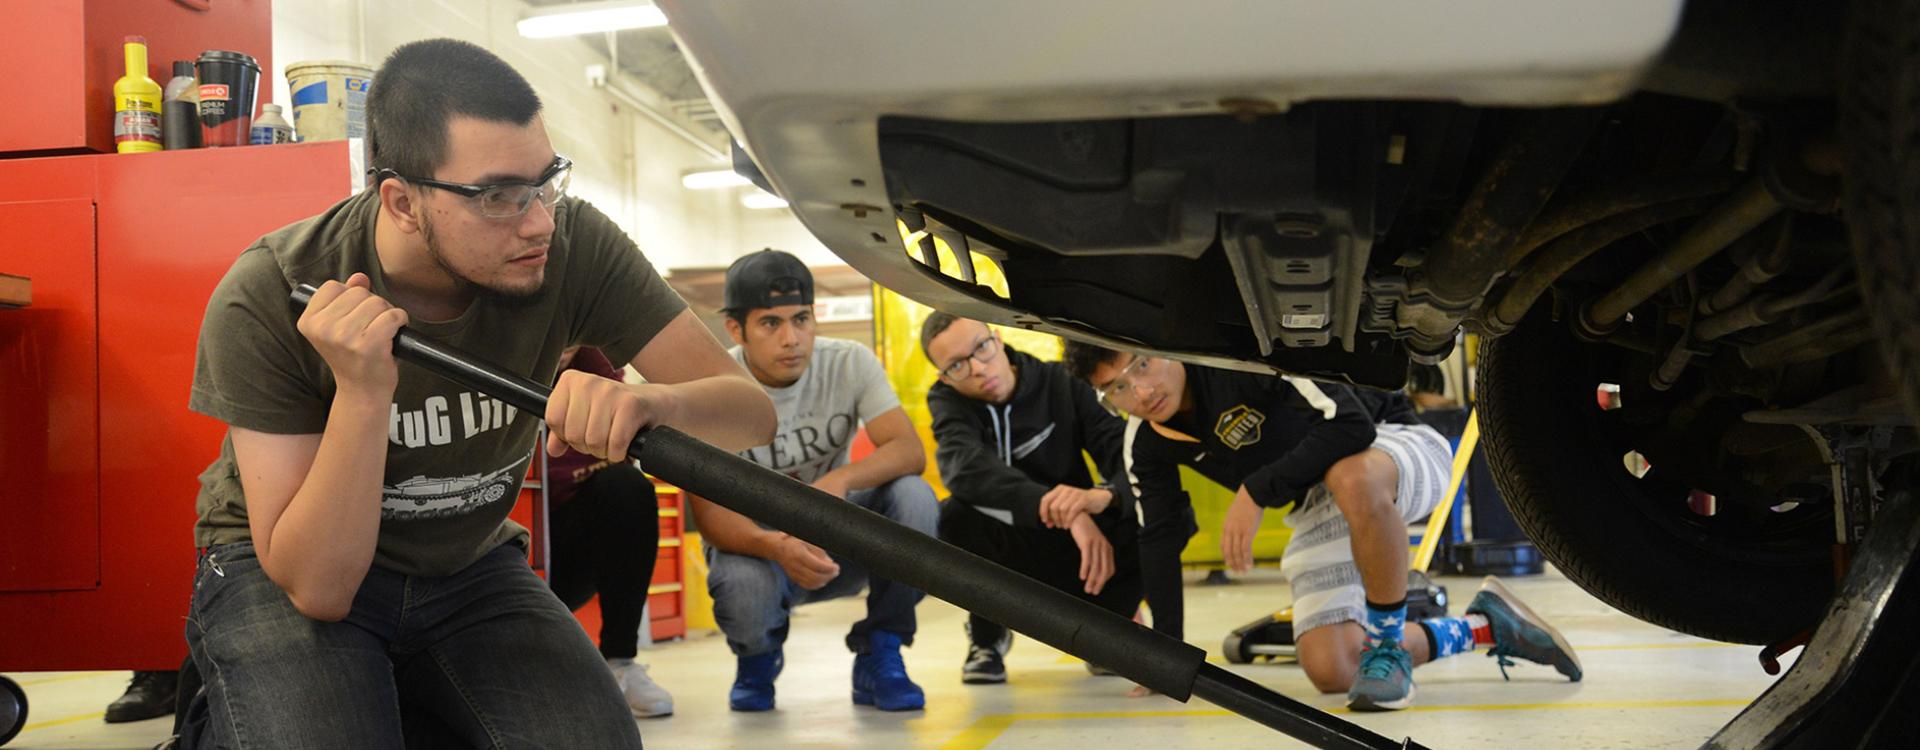 students watch a fellow student jack up a car in auto lab